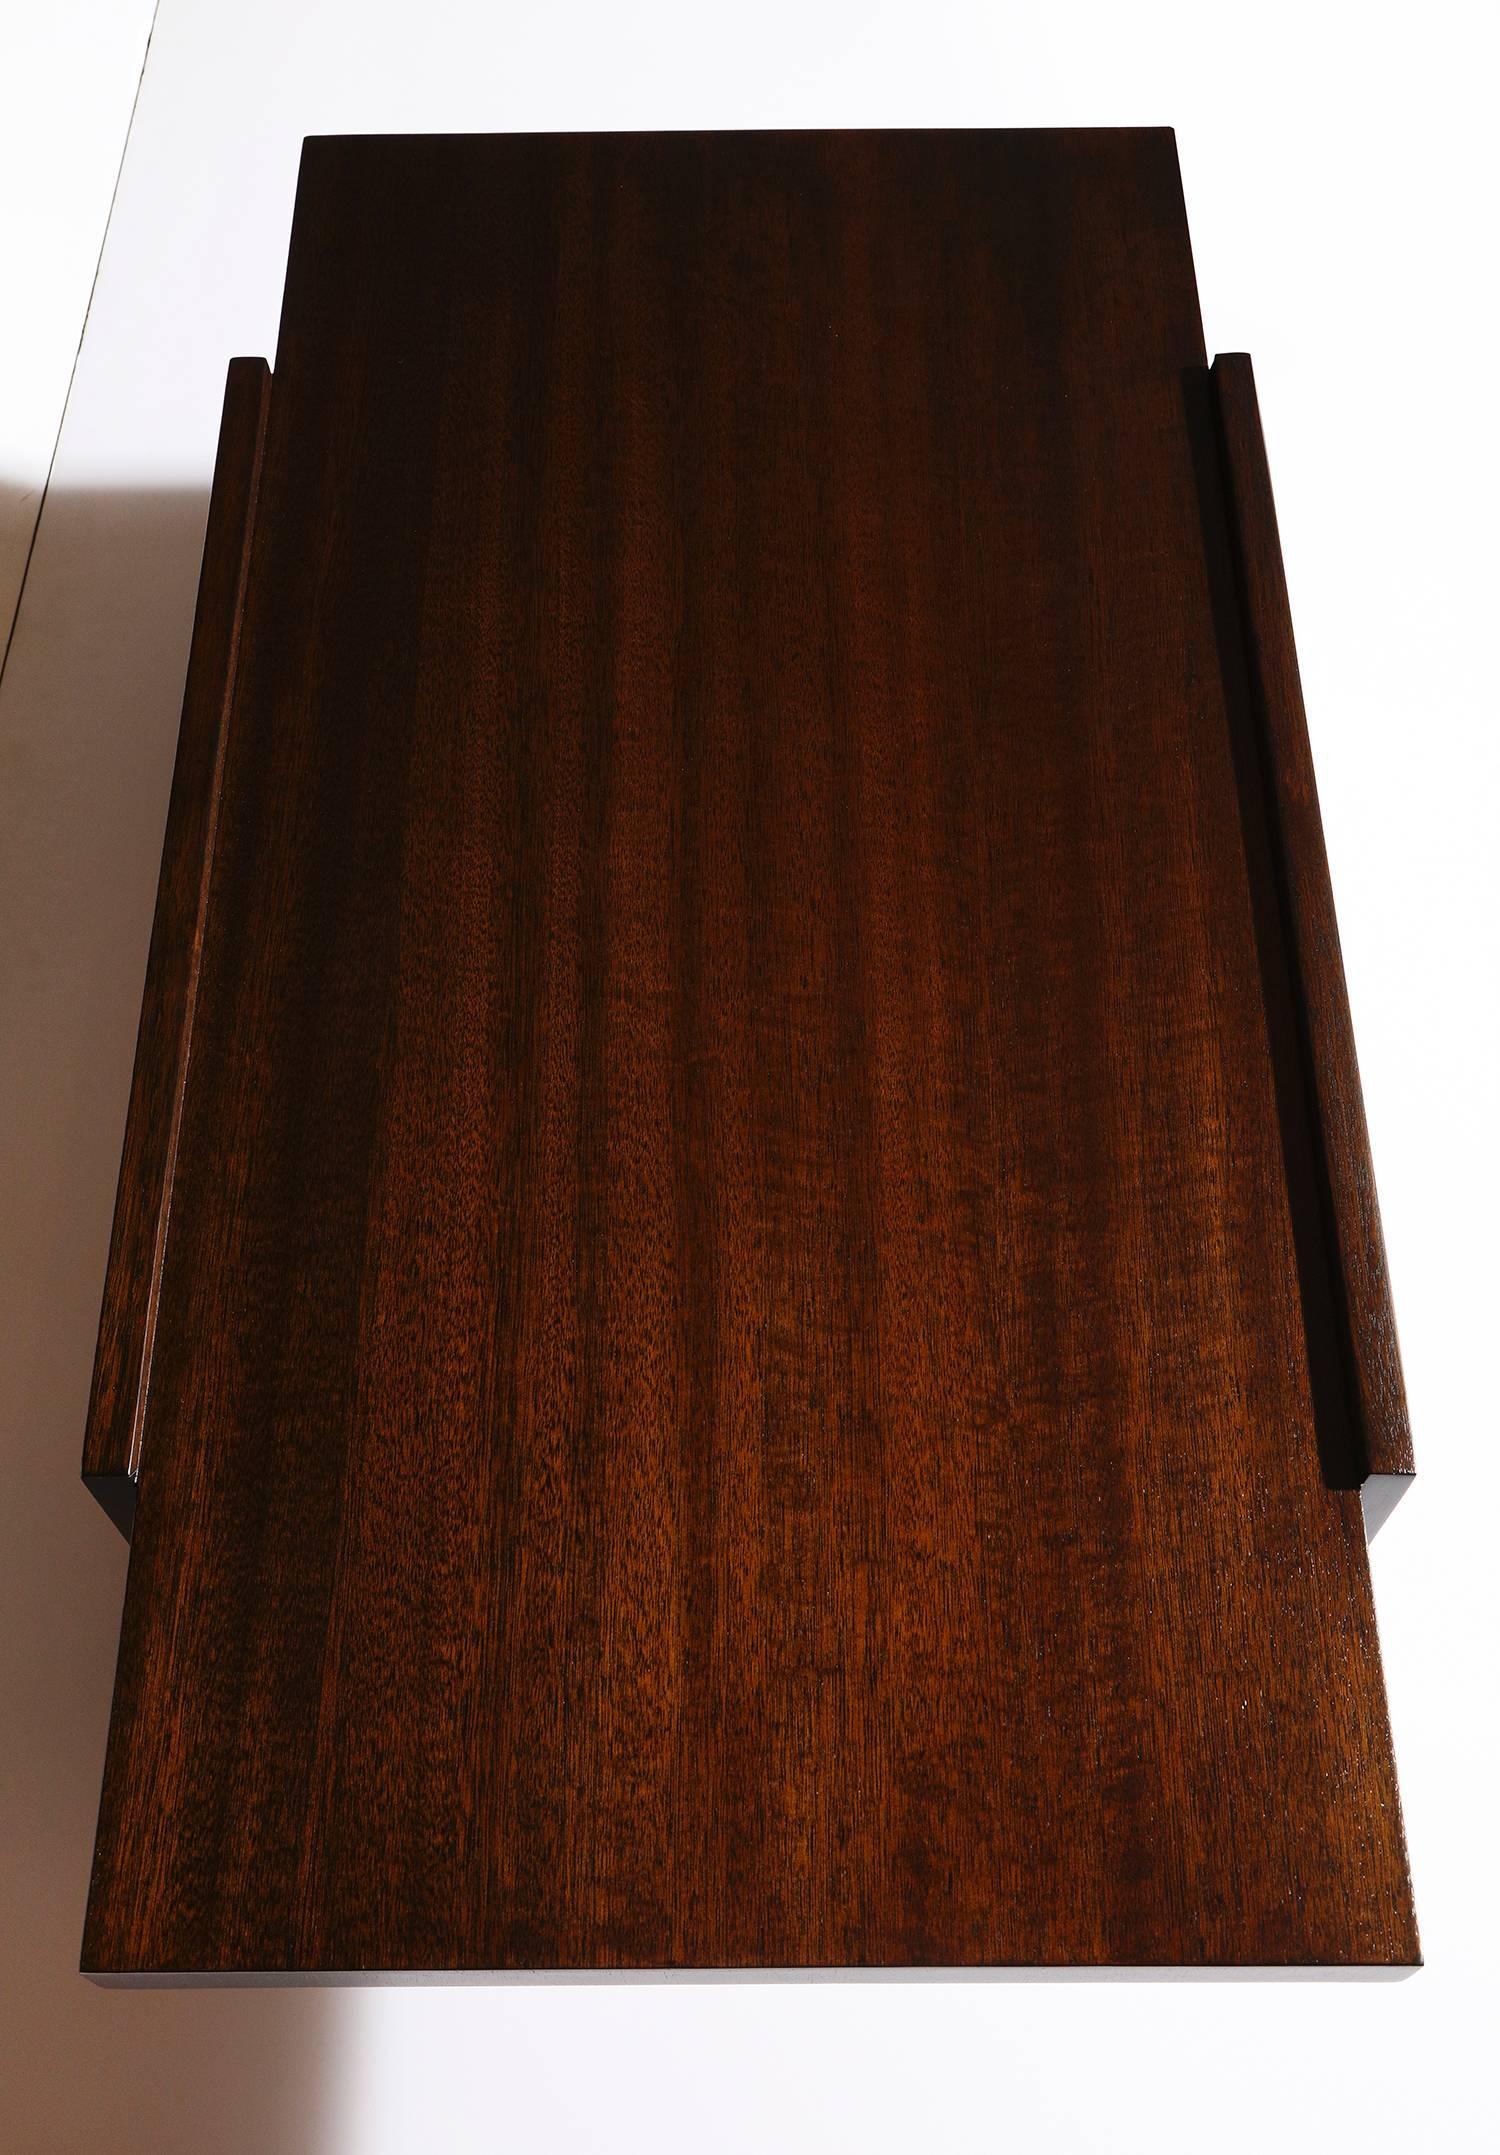 Architectural cocktail table by Paul Laszlo for Brown Saltman. Dark stained mahogany top floating on two rectangular side supports. Recently refinished and signed on underside.